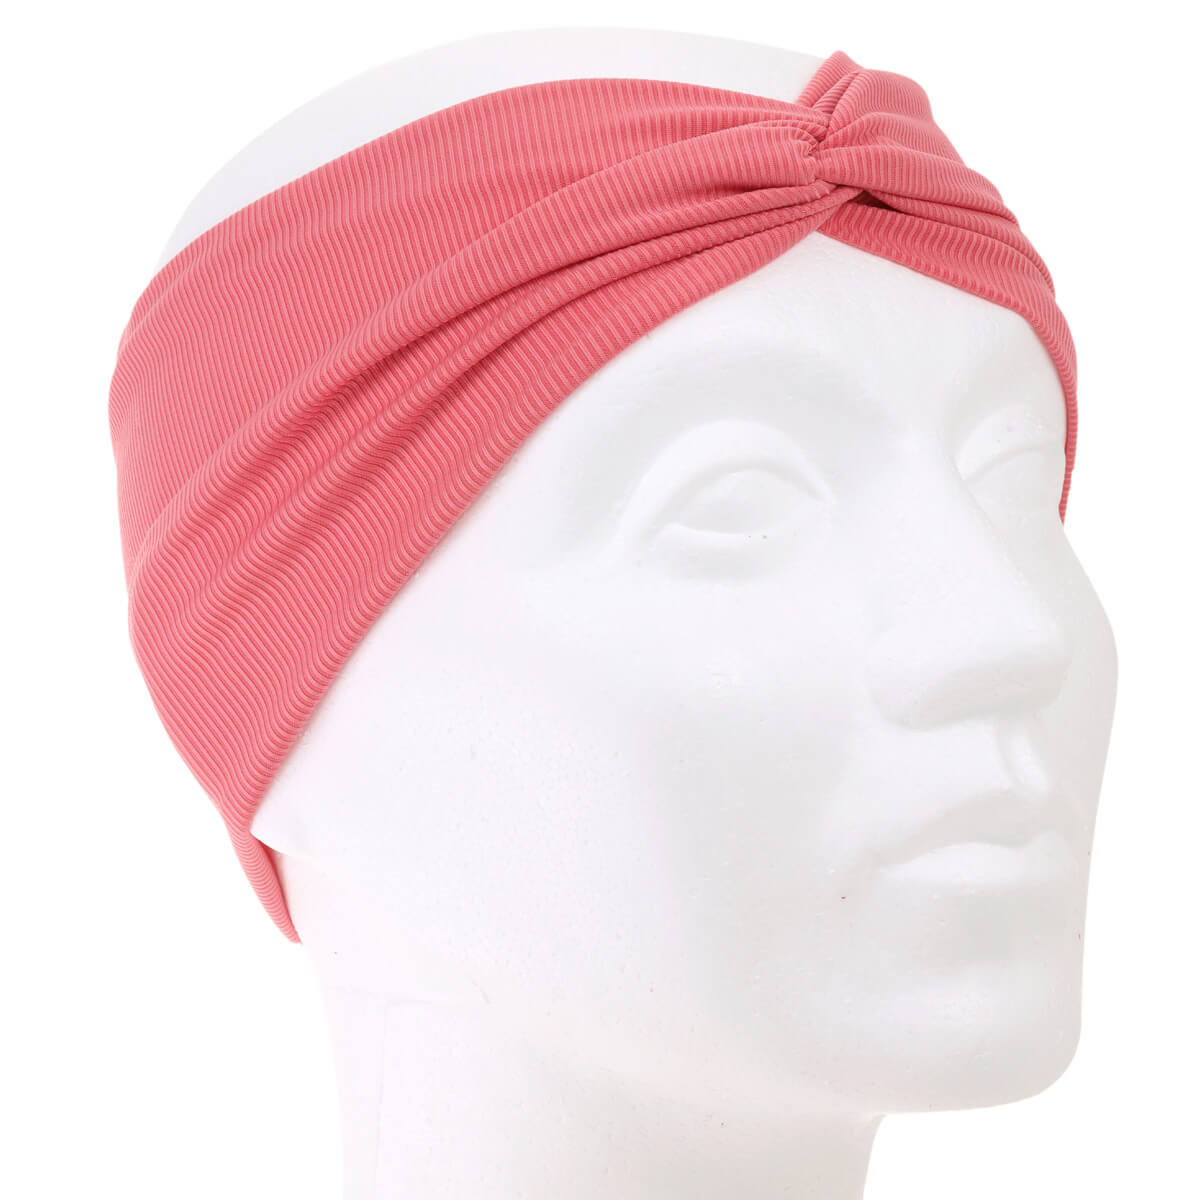 Flexible wide hairband with knot